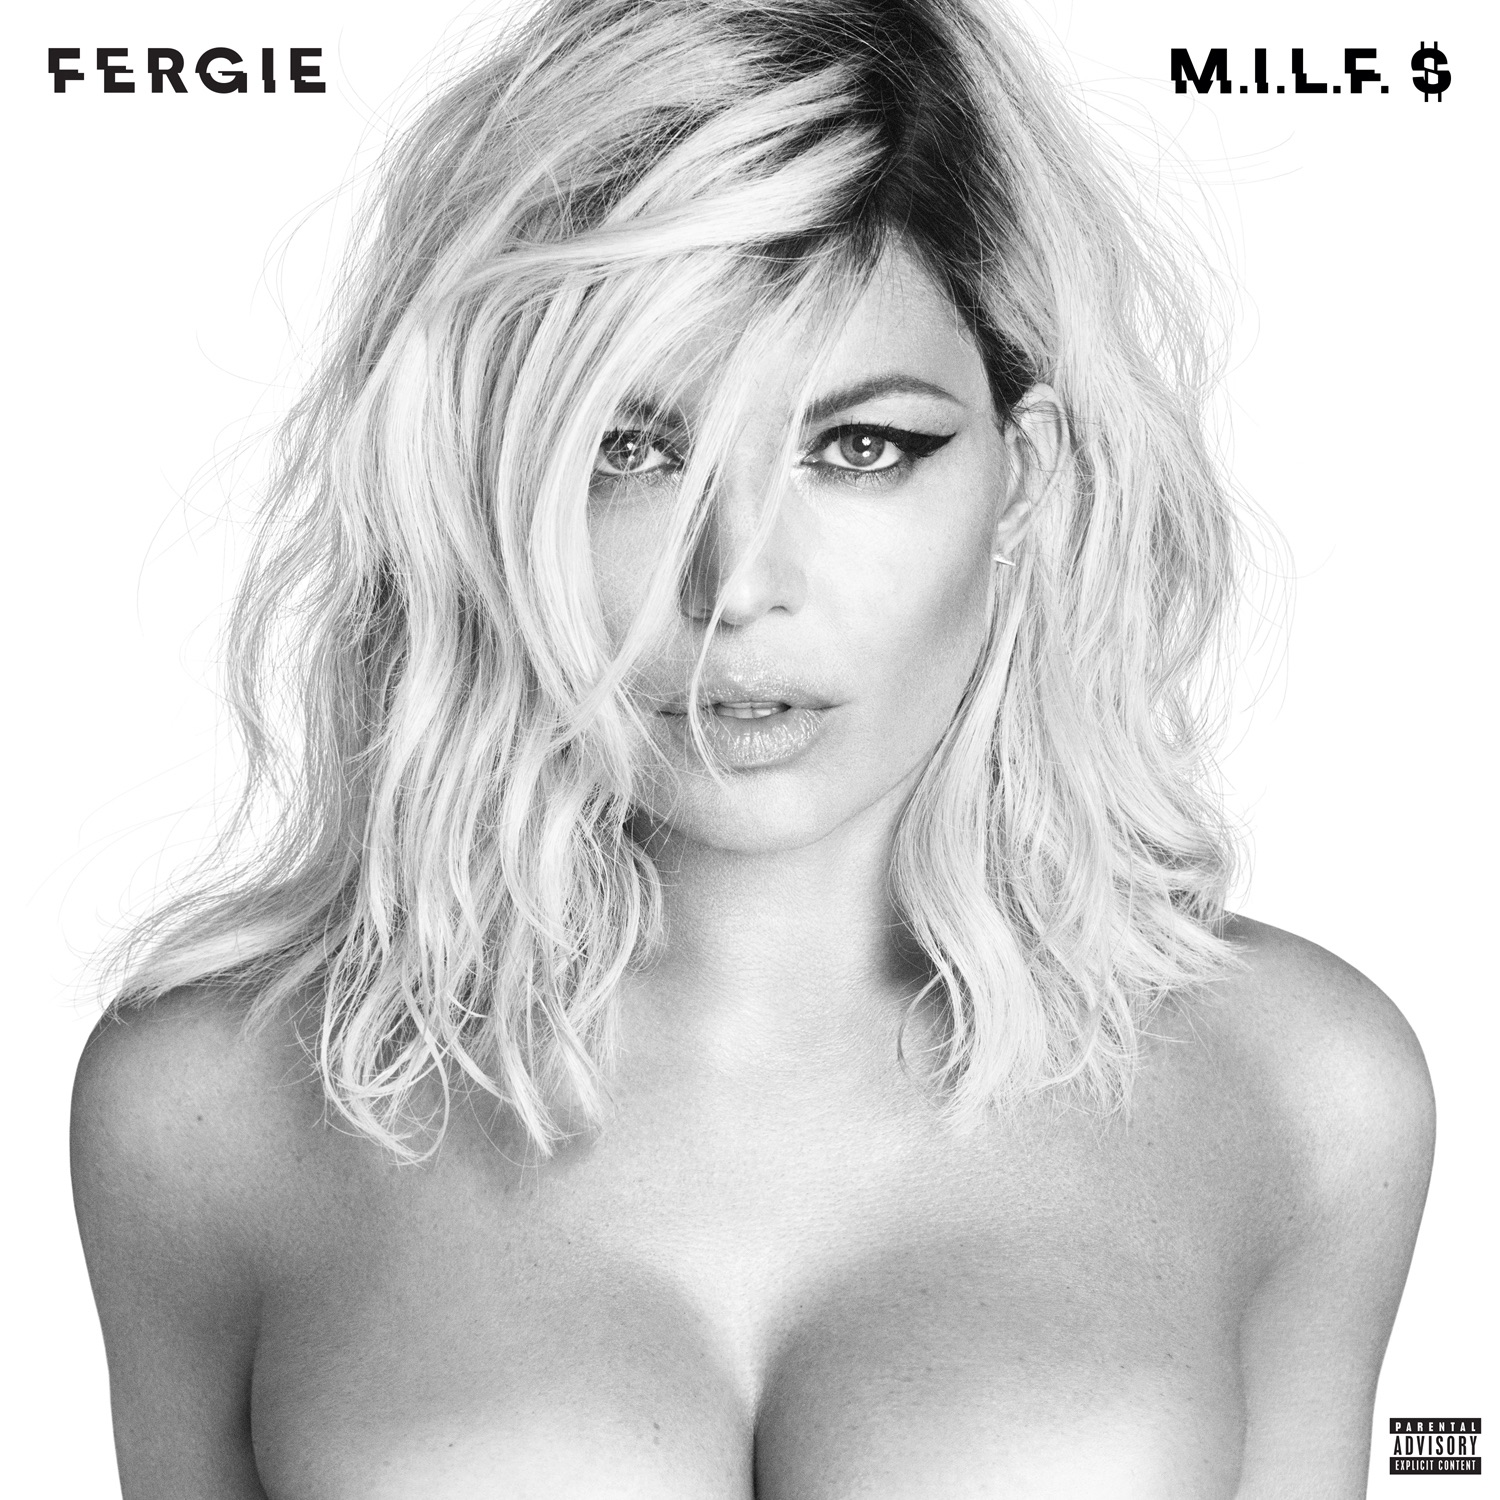 donnie weedman recommends has fergie ever been nude pic